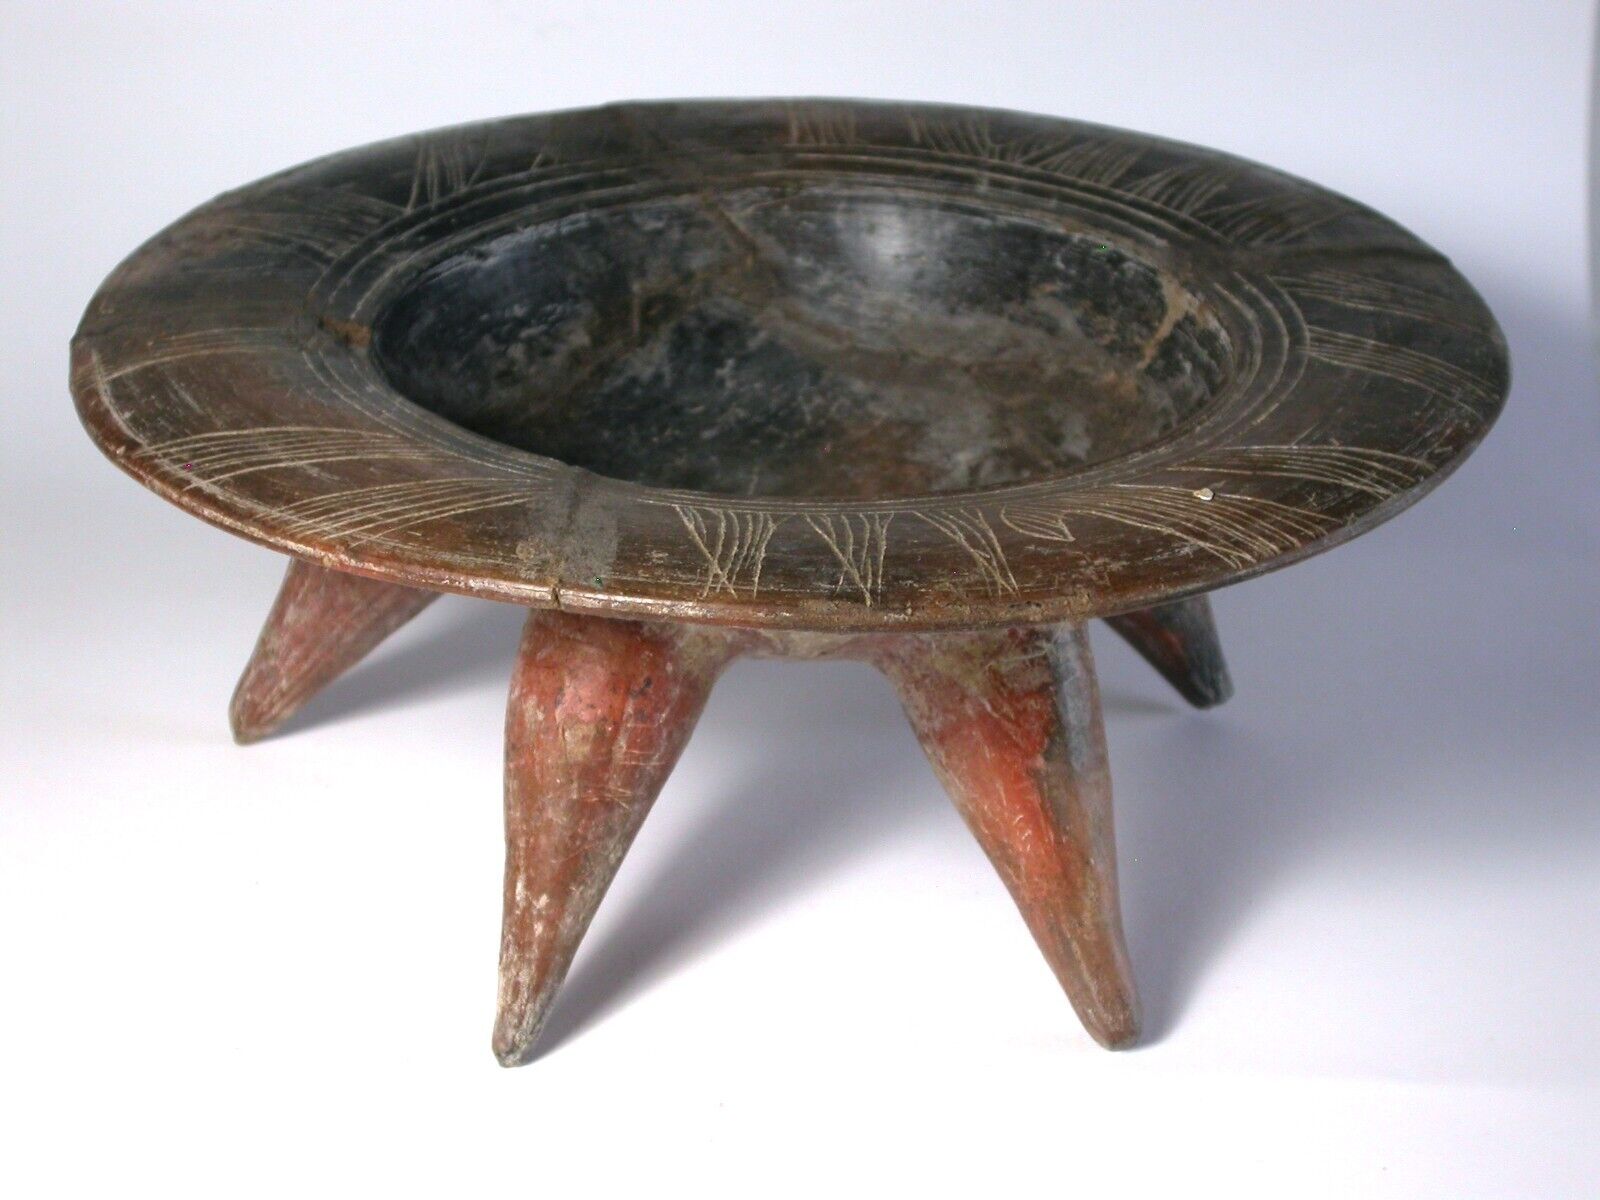 Antique Mexican Pre Columbian Period Pottery Bowl with Five Legs Aztec, Mayan...